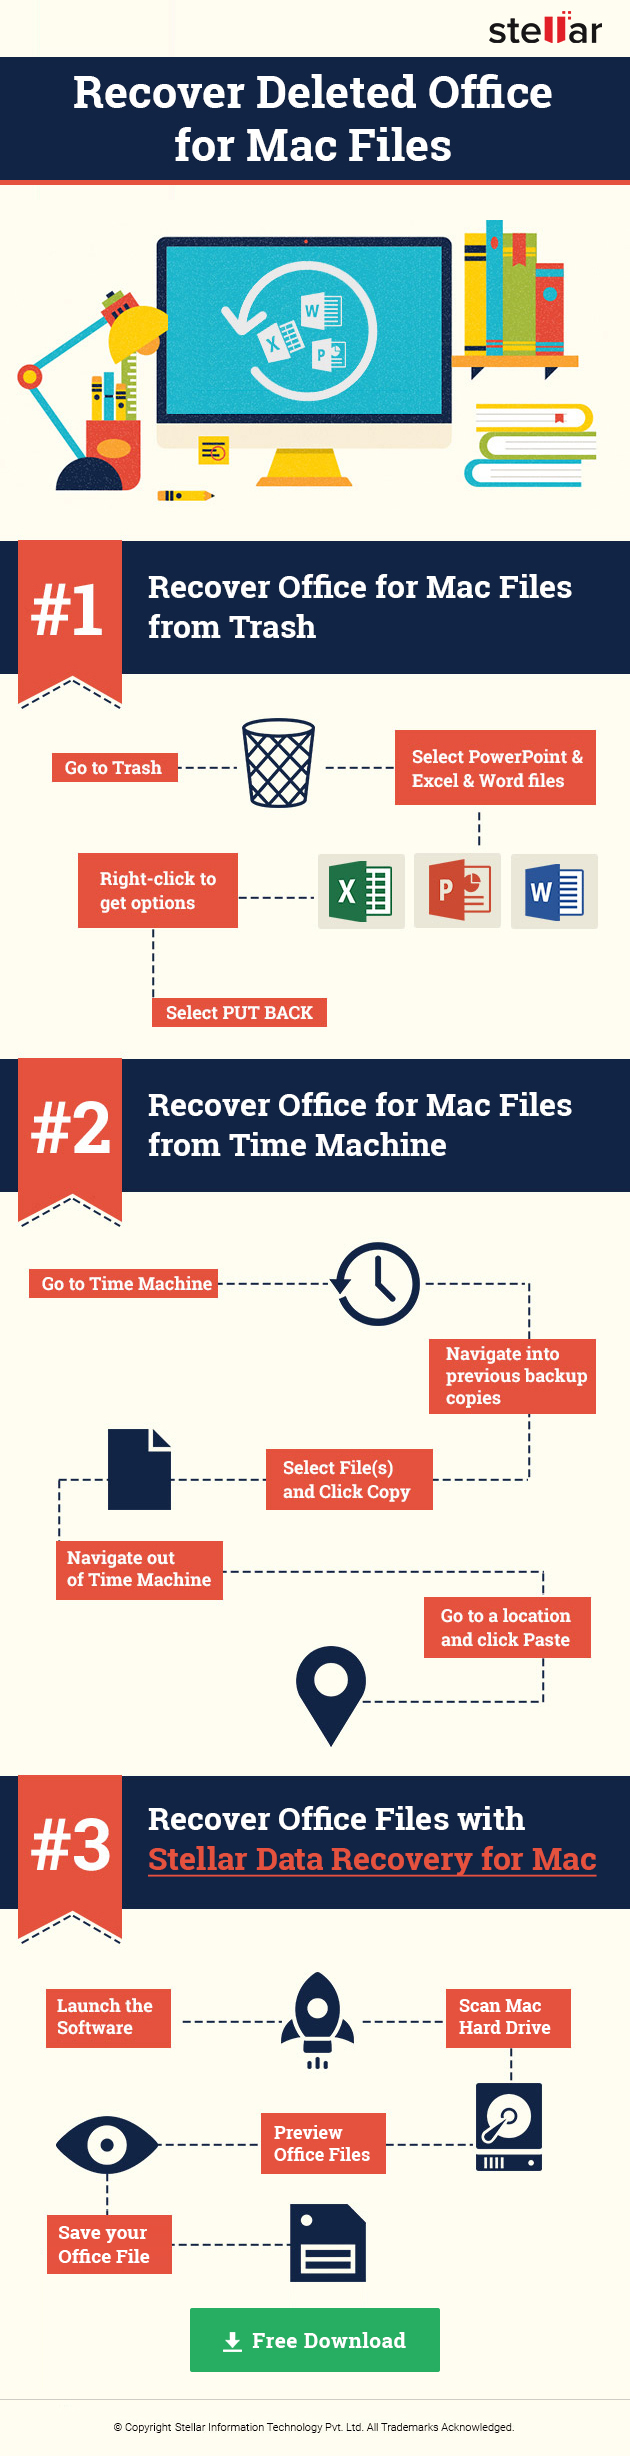 powerpoint for mac upgrade lost file -autorecover